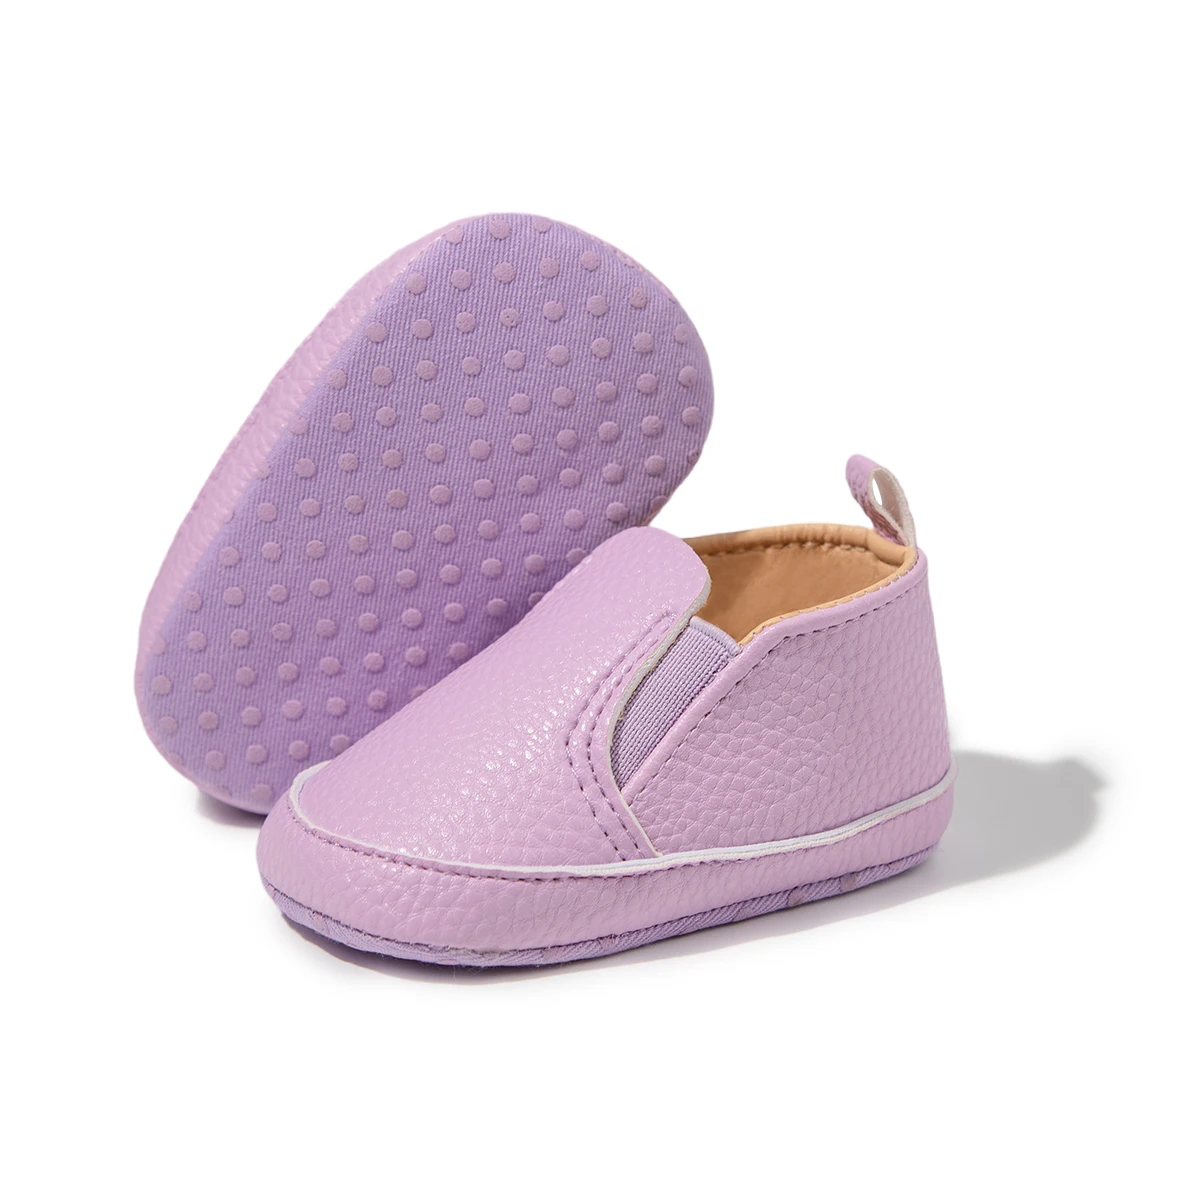 New arrived newborn PU Leather soft-sole loafers slip on moccasin Casual baby shoes